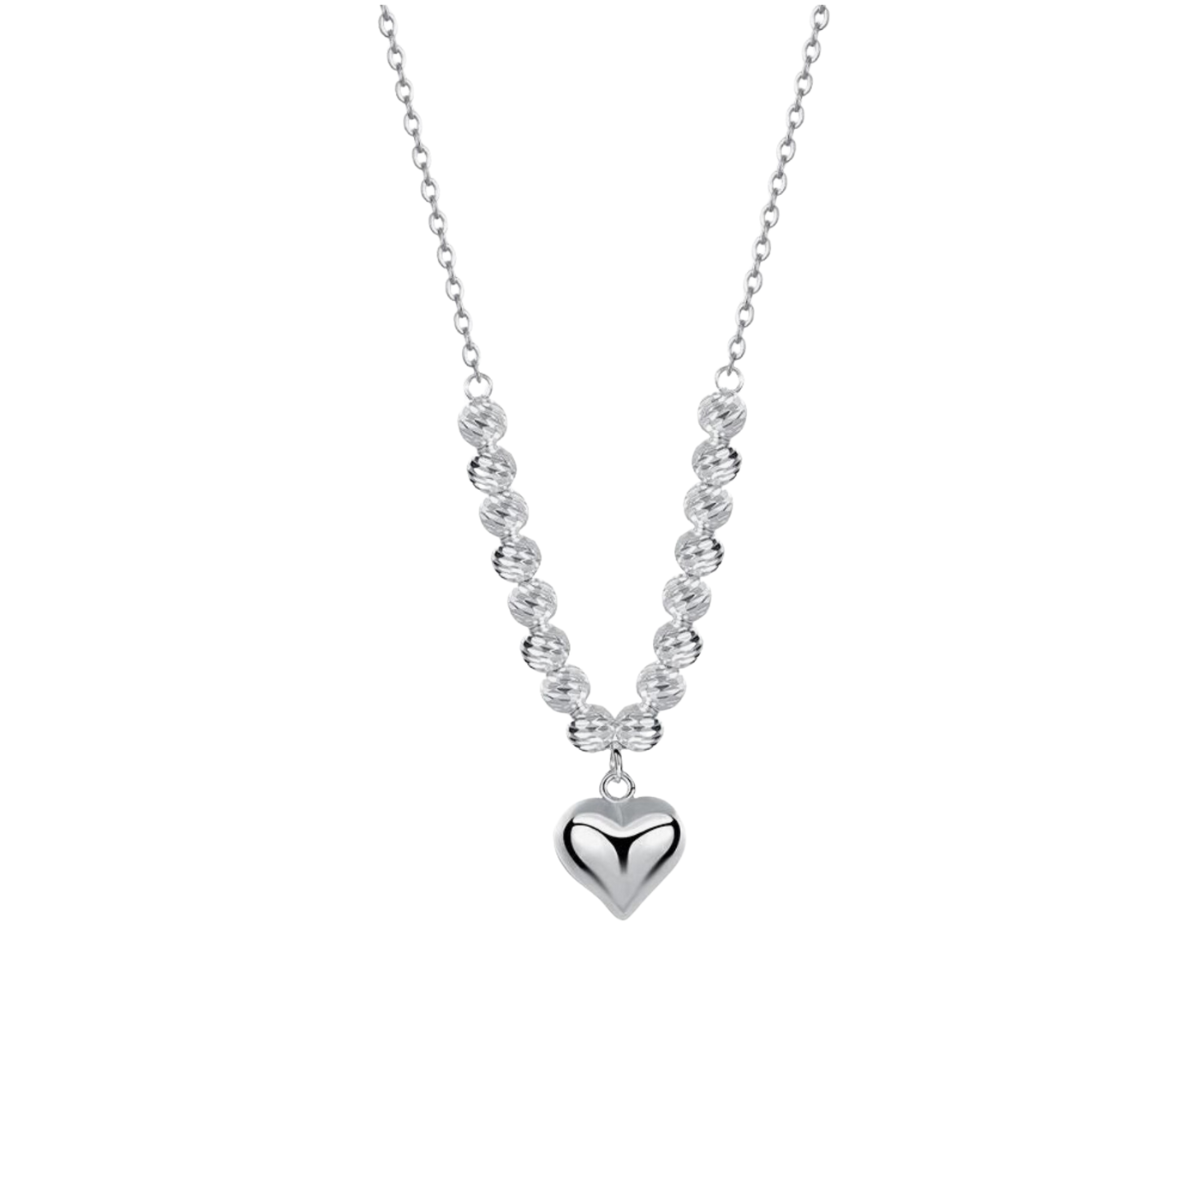 Sterling Silver Heart Pendant Beaded Adjustable Necklace 